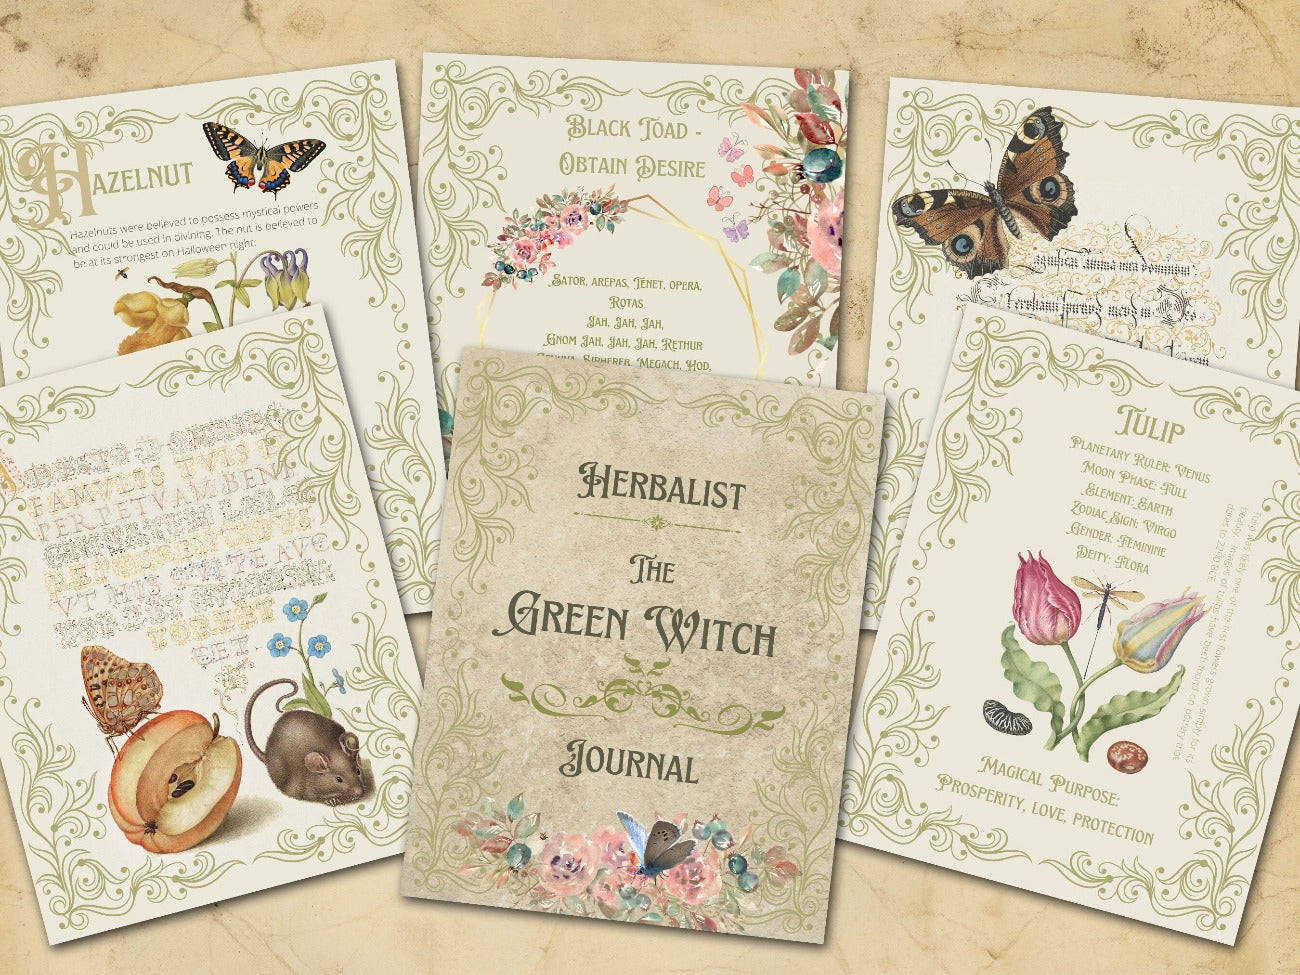 Green Witch Journal front page, hazelnut, tulip, black toad and two fancy scrip ephemera pages - Morgana Magick Spell